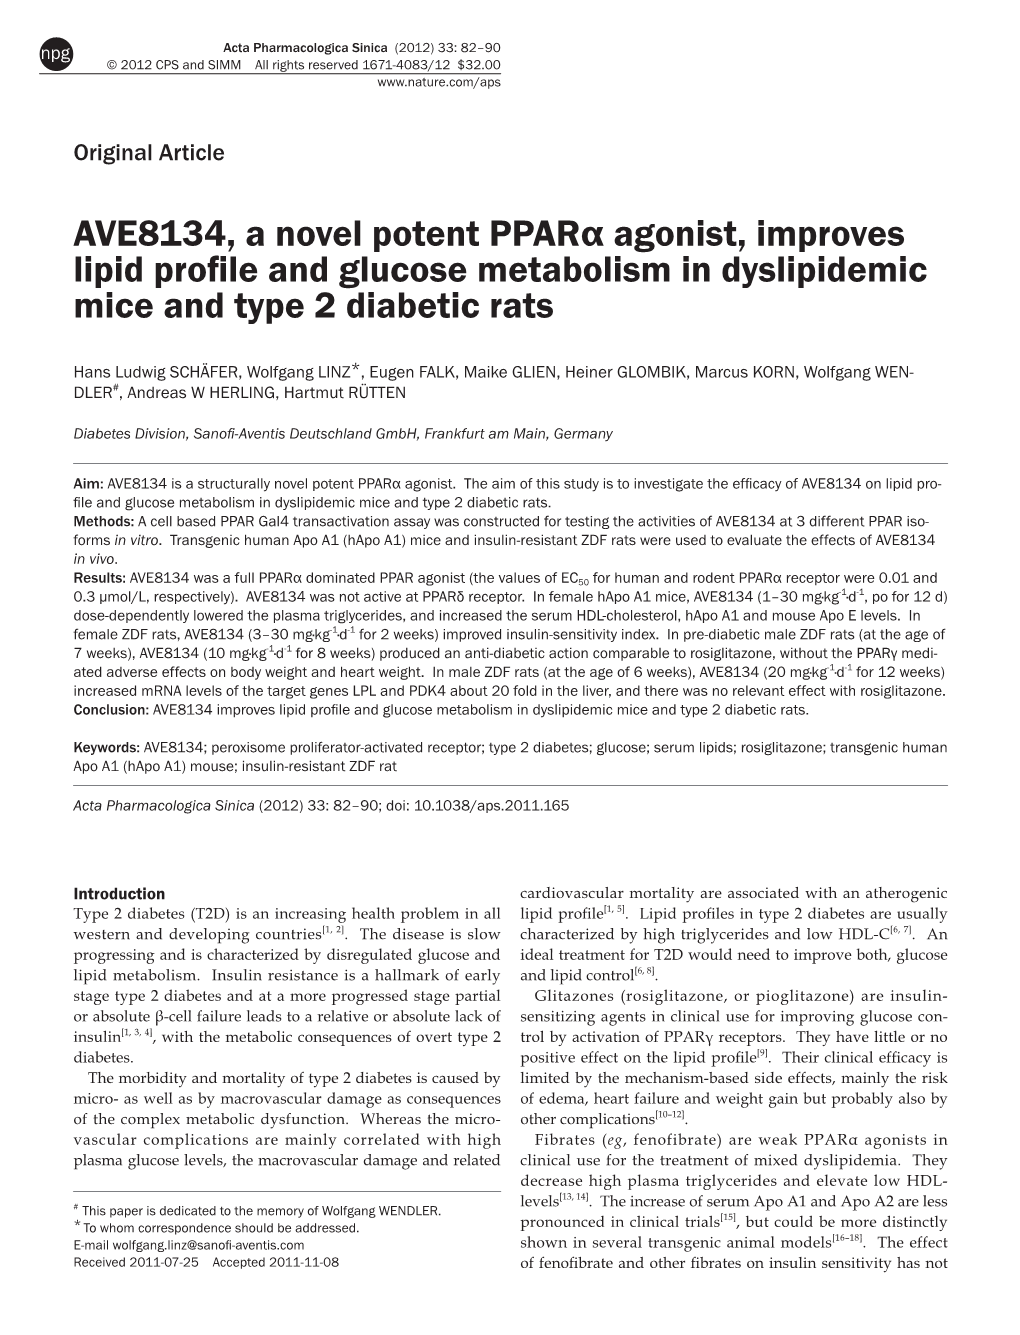 AVE8134, a Novel Potent Pparα Agonist, Improves Lipid Profile and Glucose Metabolism in Dyslipidemic Mice and Type 2 Diabetic Rats